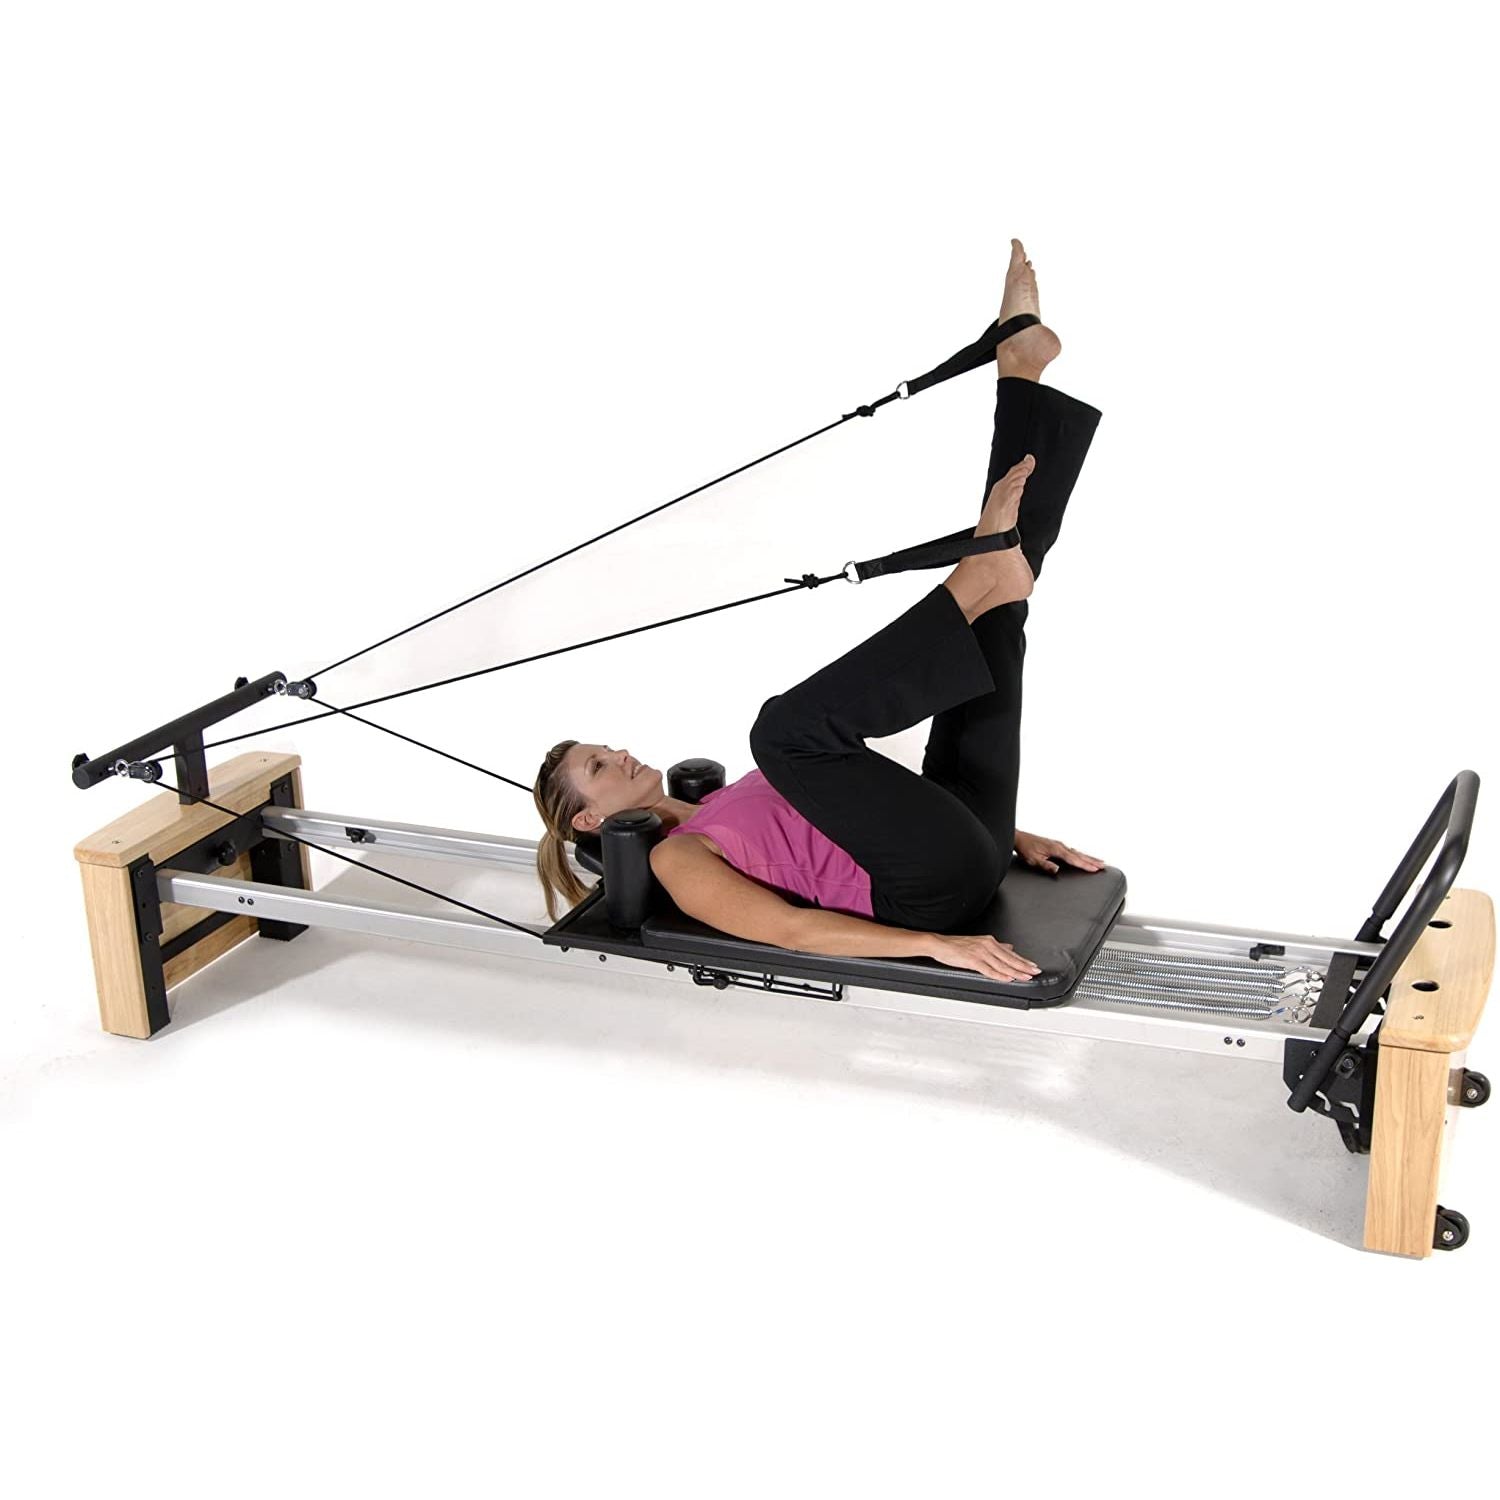 AeroPilates Pro XP 556 Reformer with Free-Form Cardio Rebounder - Pilates  Reformer Workout Machine for Home Gym - Up to 300 lbs Weight Capacity